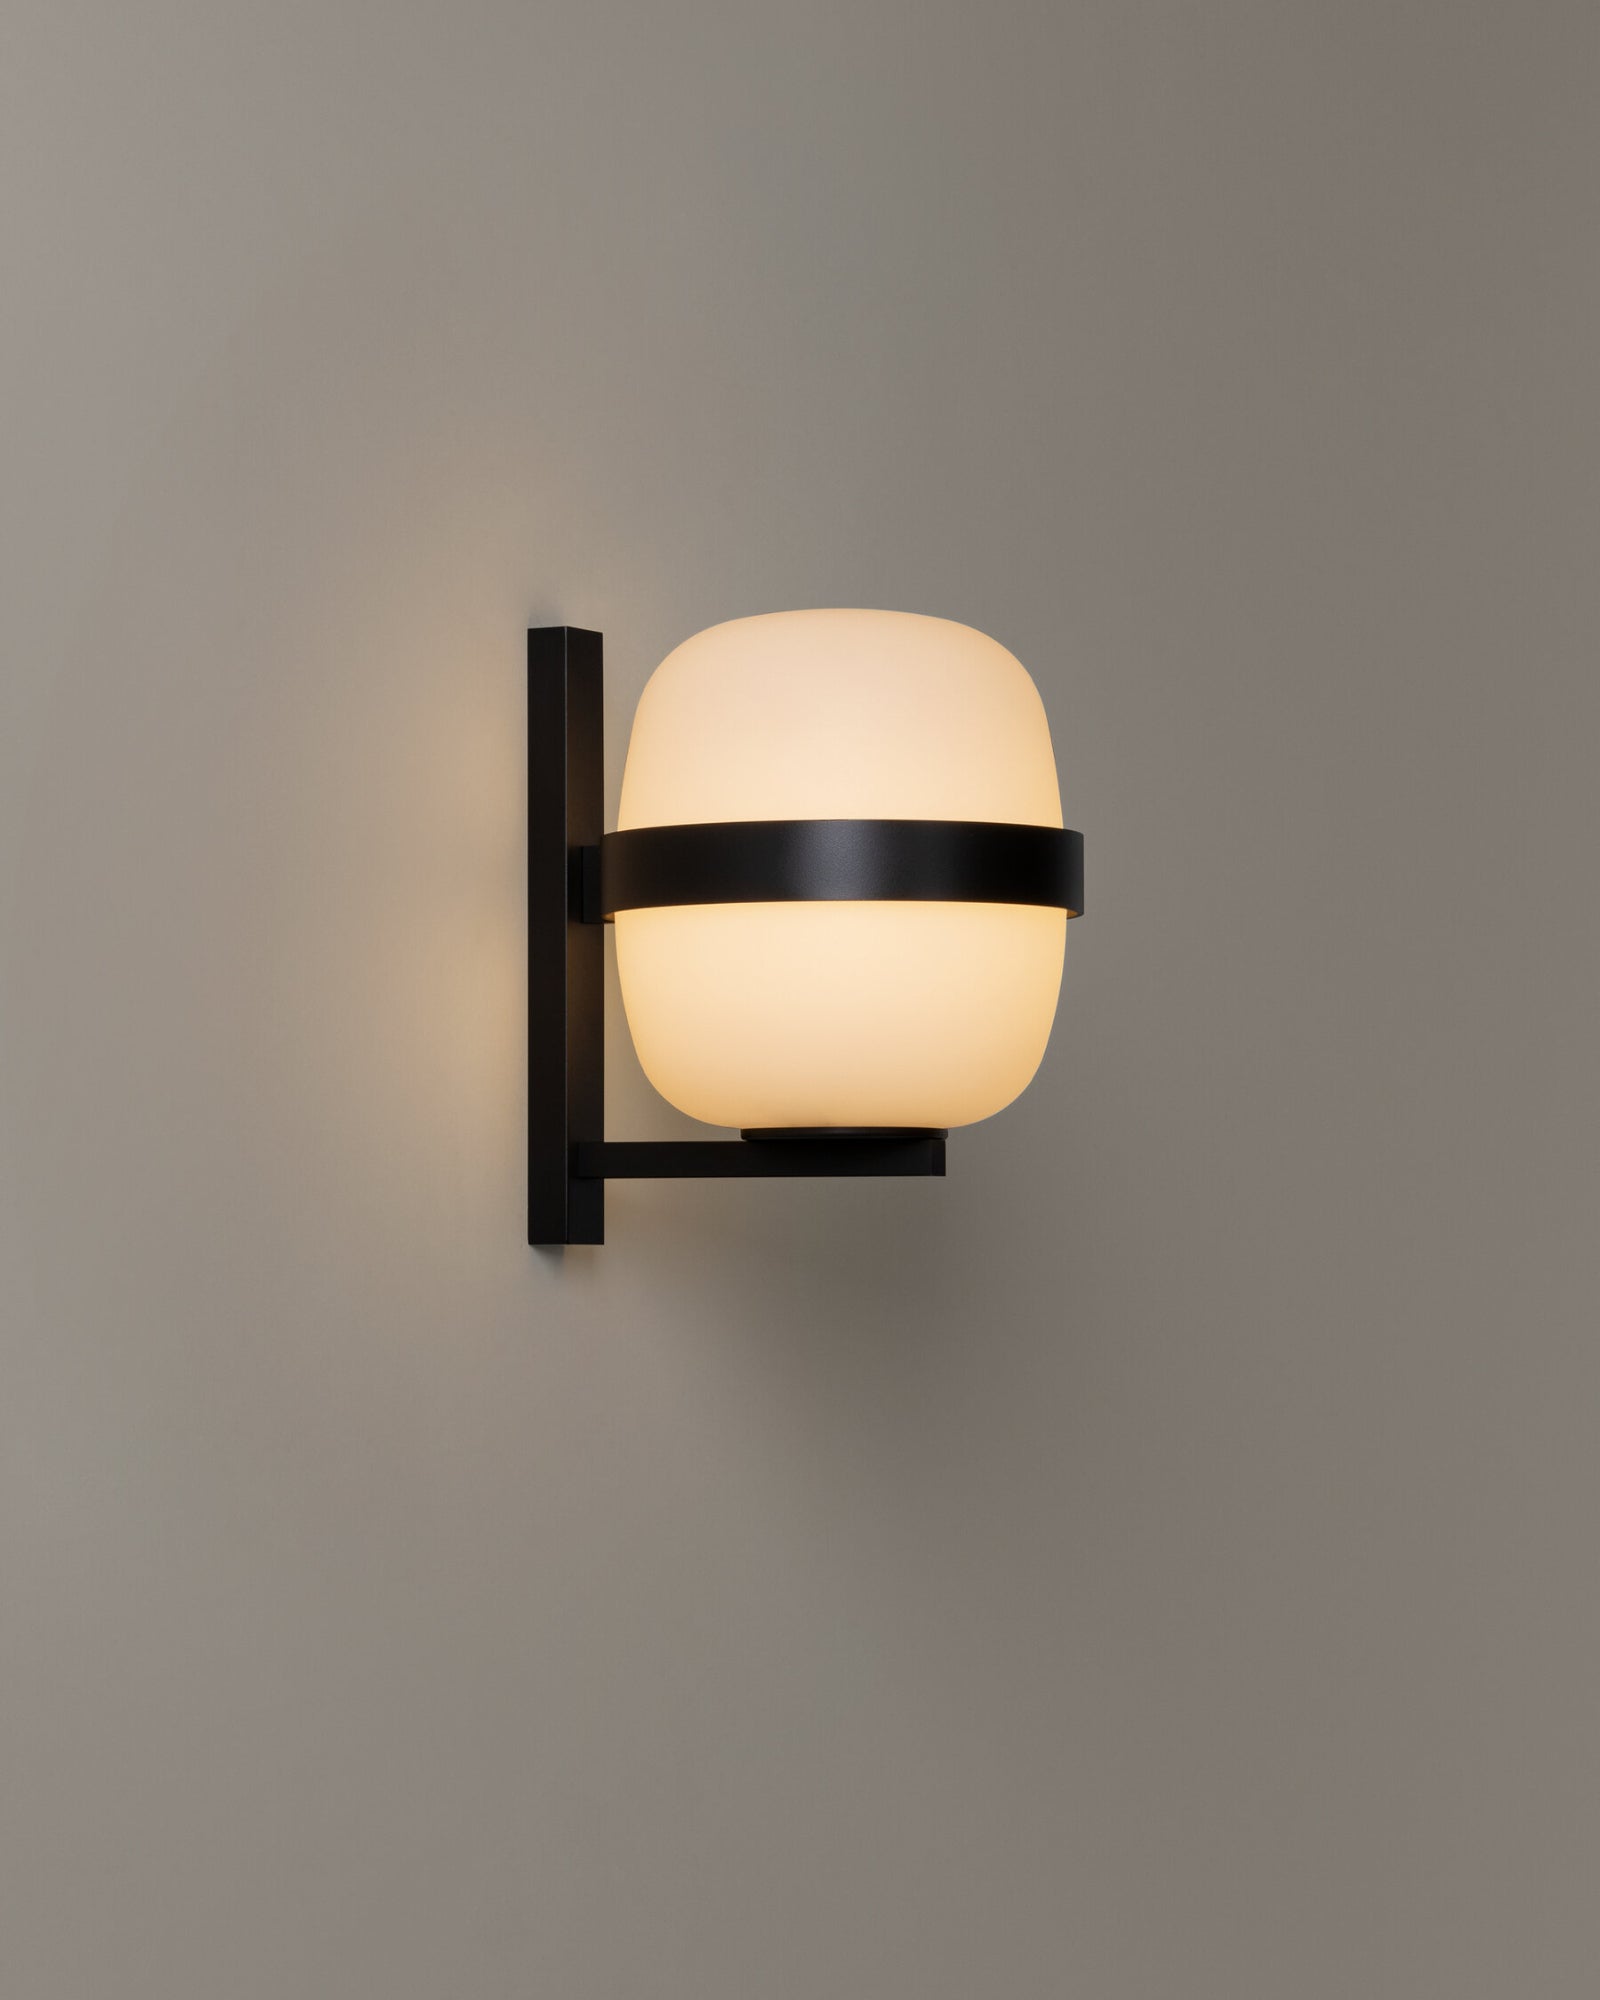 Black metal outdoor wall light with a spherical white glass shade | Nook Collections